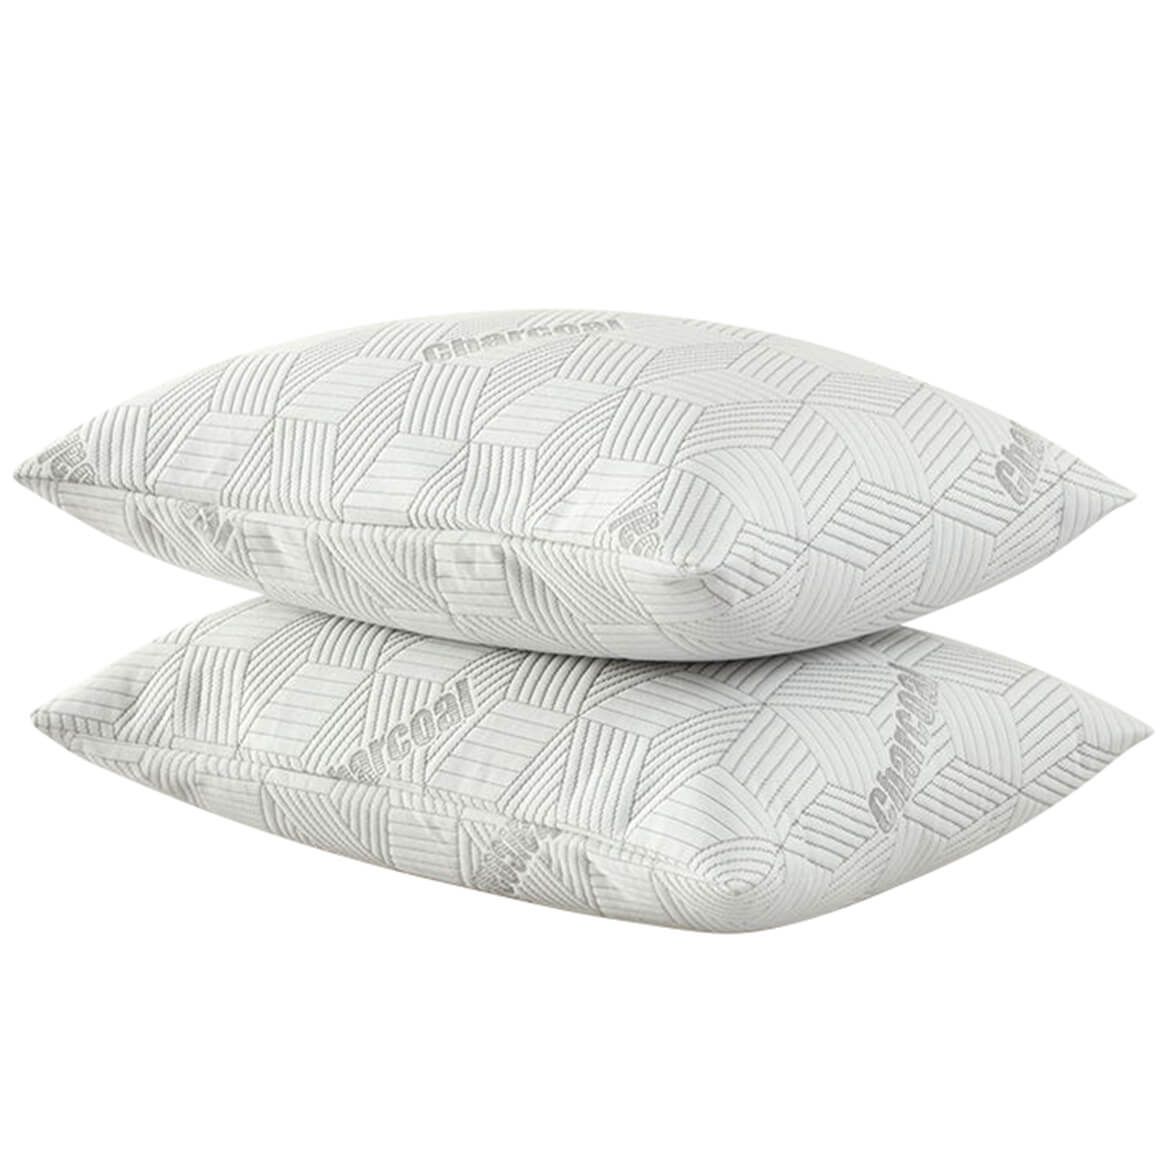 Charcoal Pillow Covers by OakRidge™, Set of 2 + '-' + 374635